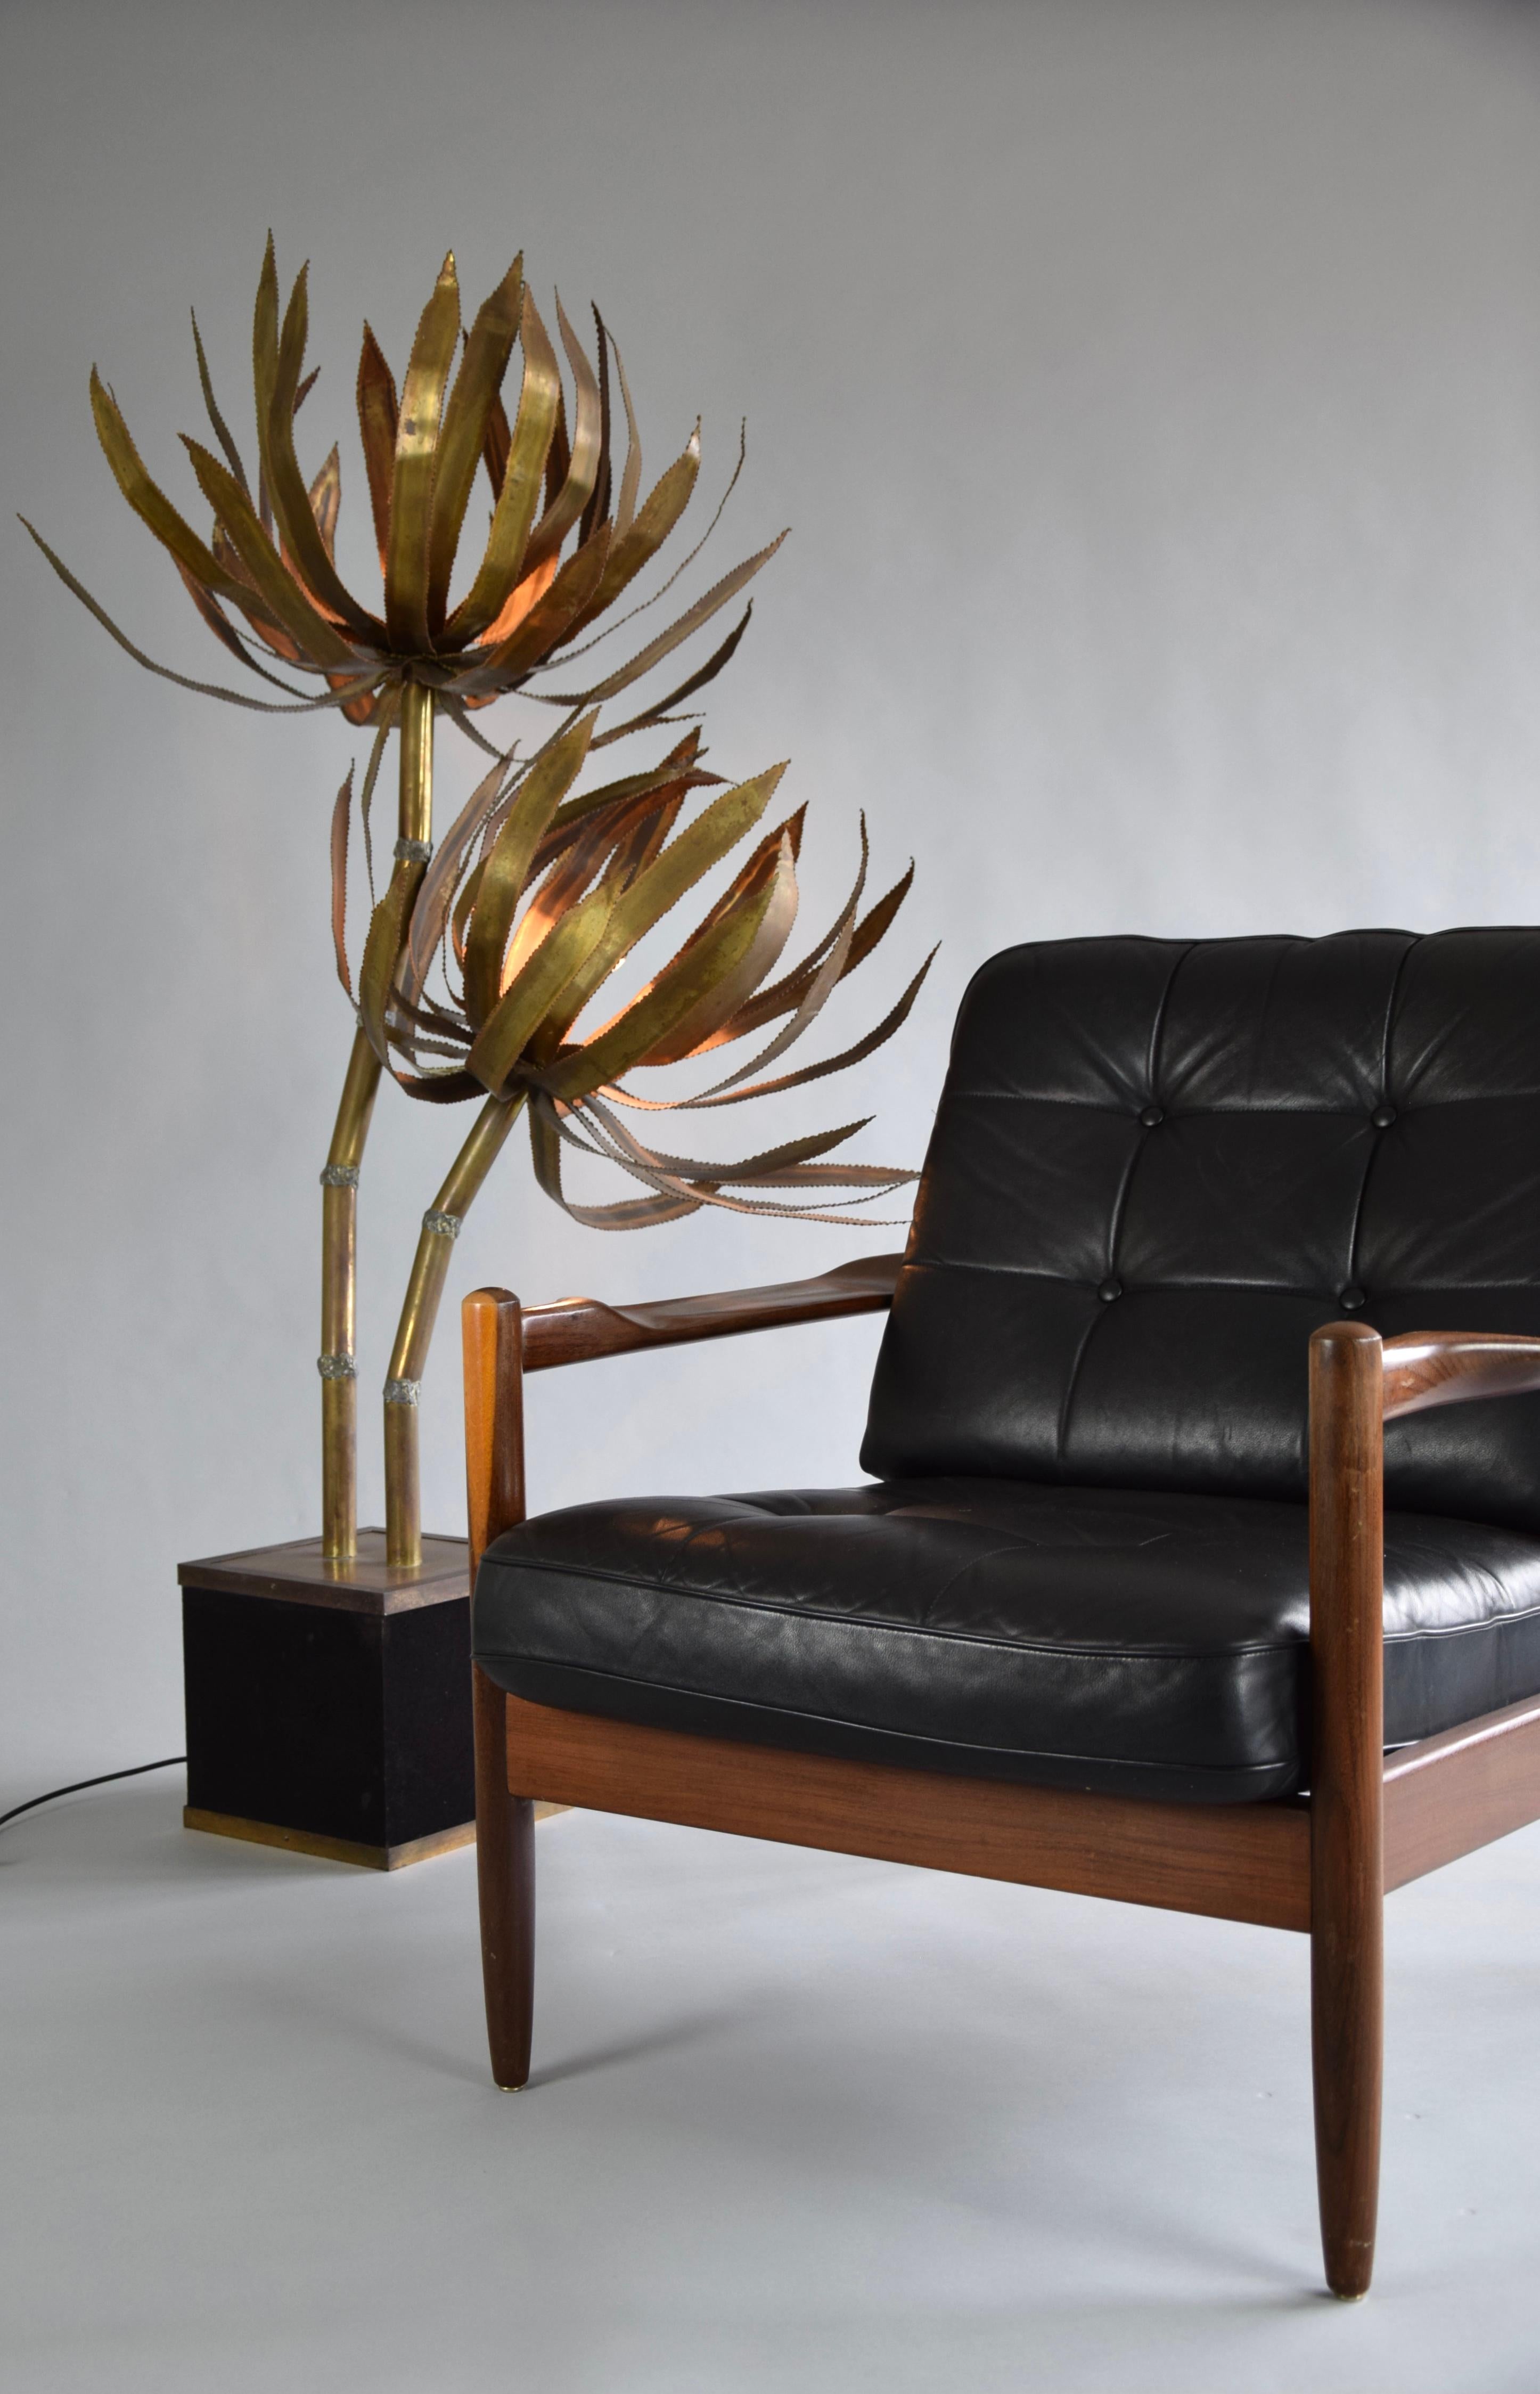 Stylish palm tree floor lamp by Maison Jansen, France, 1970. The floor lamp has a cubic base covered with black velvet upholstery and a brass rim. The palm is made of solid brass and has a nice patina from age. There are a lot of new replica lamps